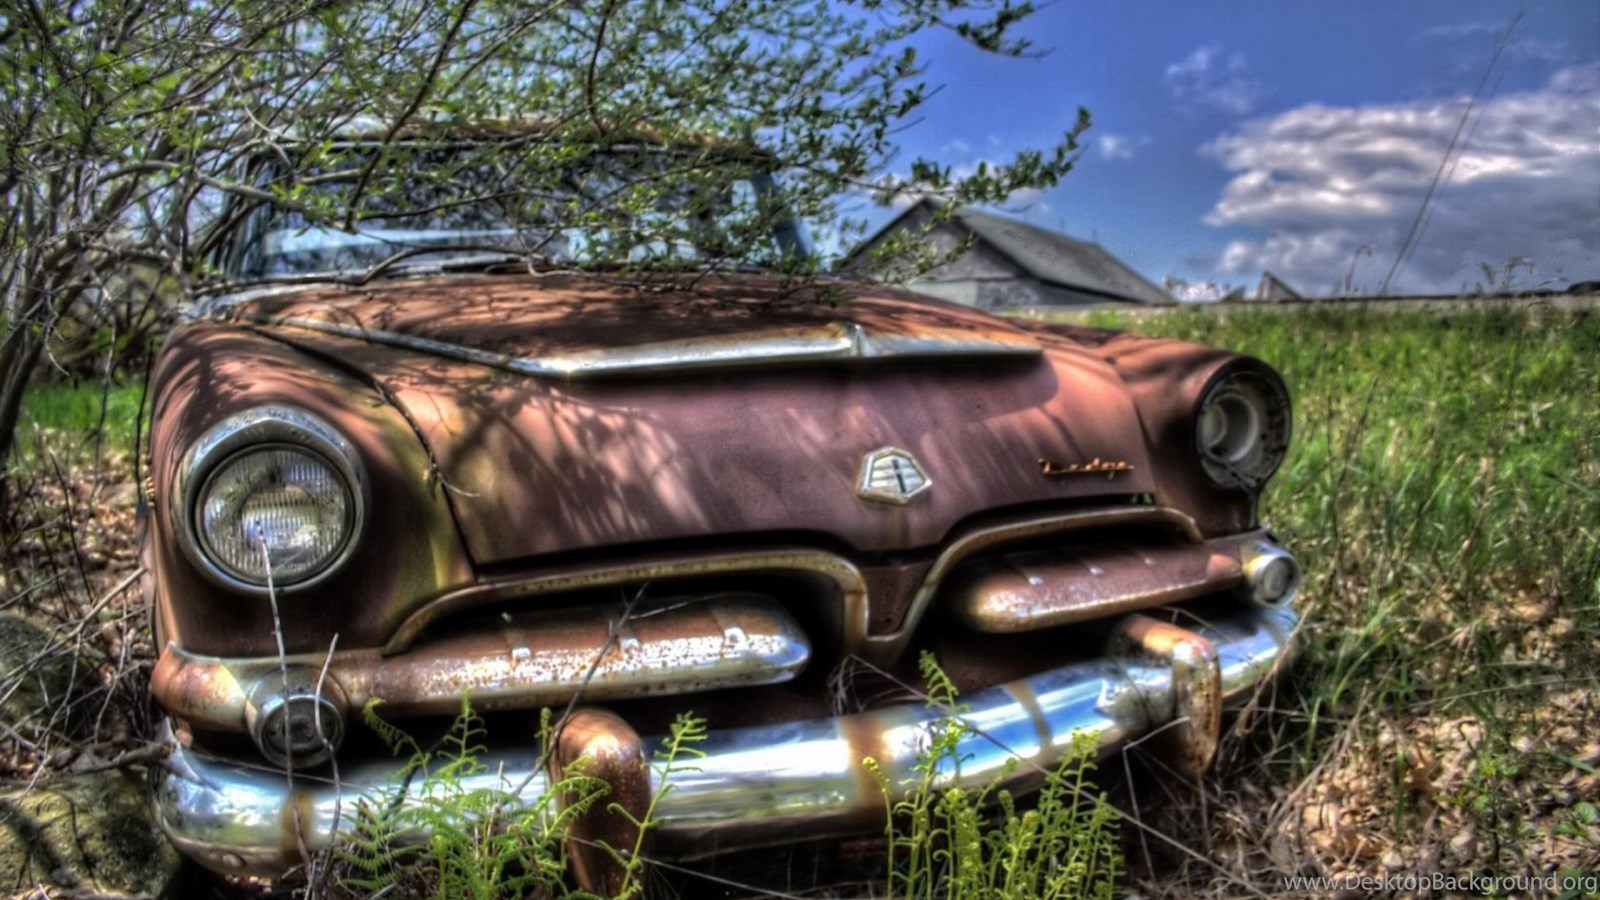 Old Abandoned Car Wallpaper And Image Wallpaper, Picture, Photo Desktop Background